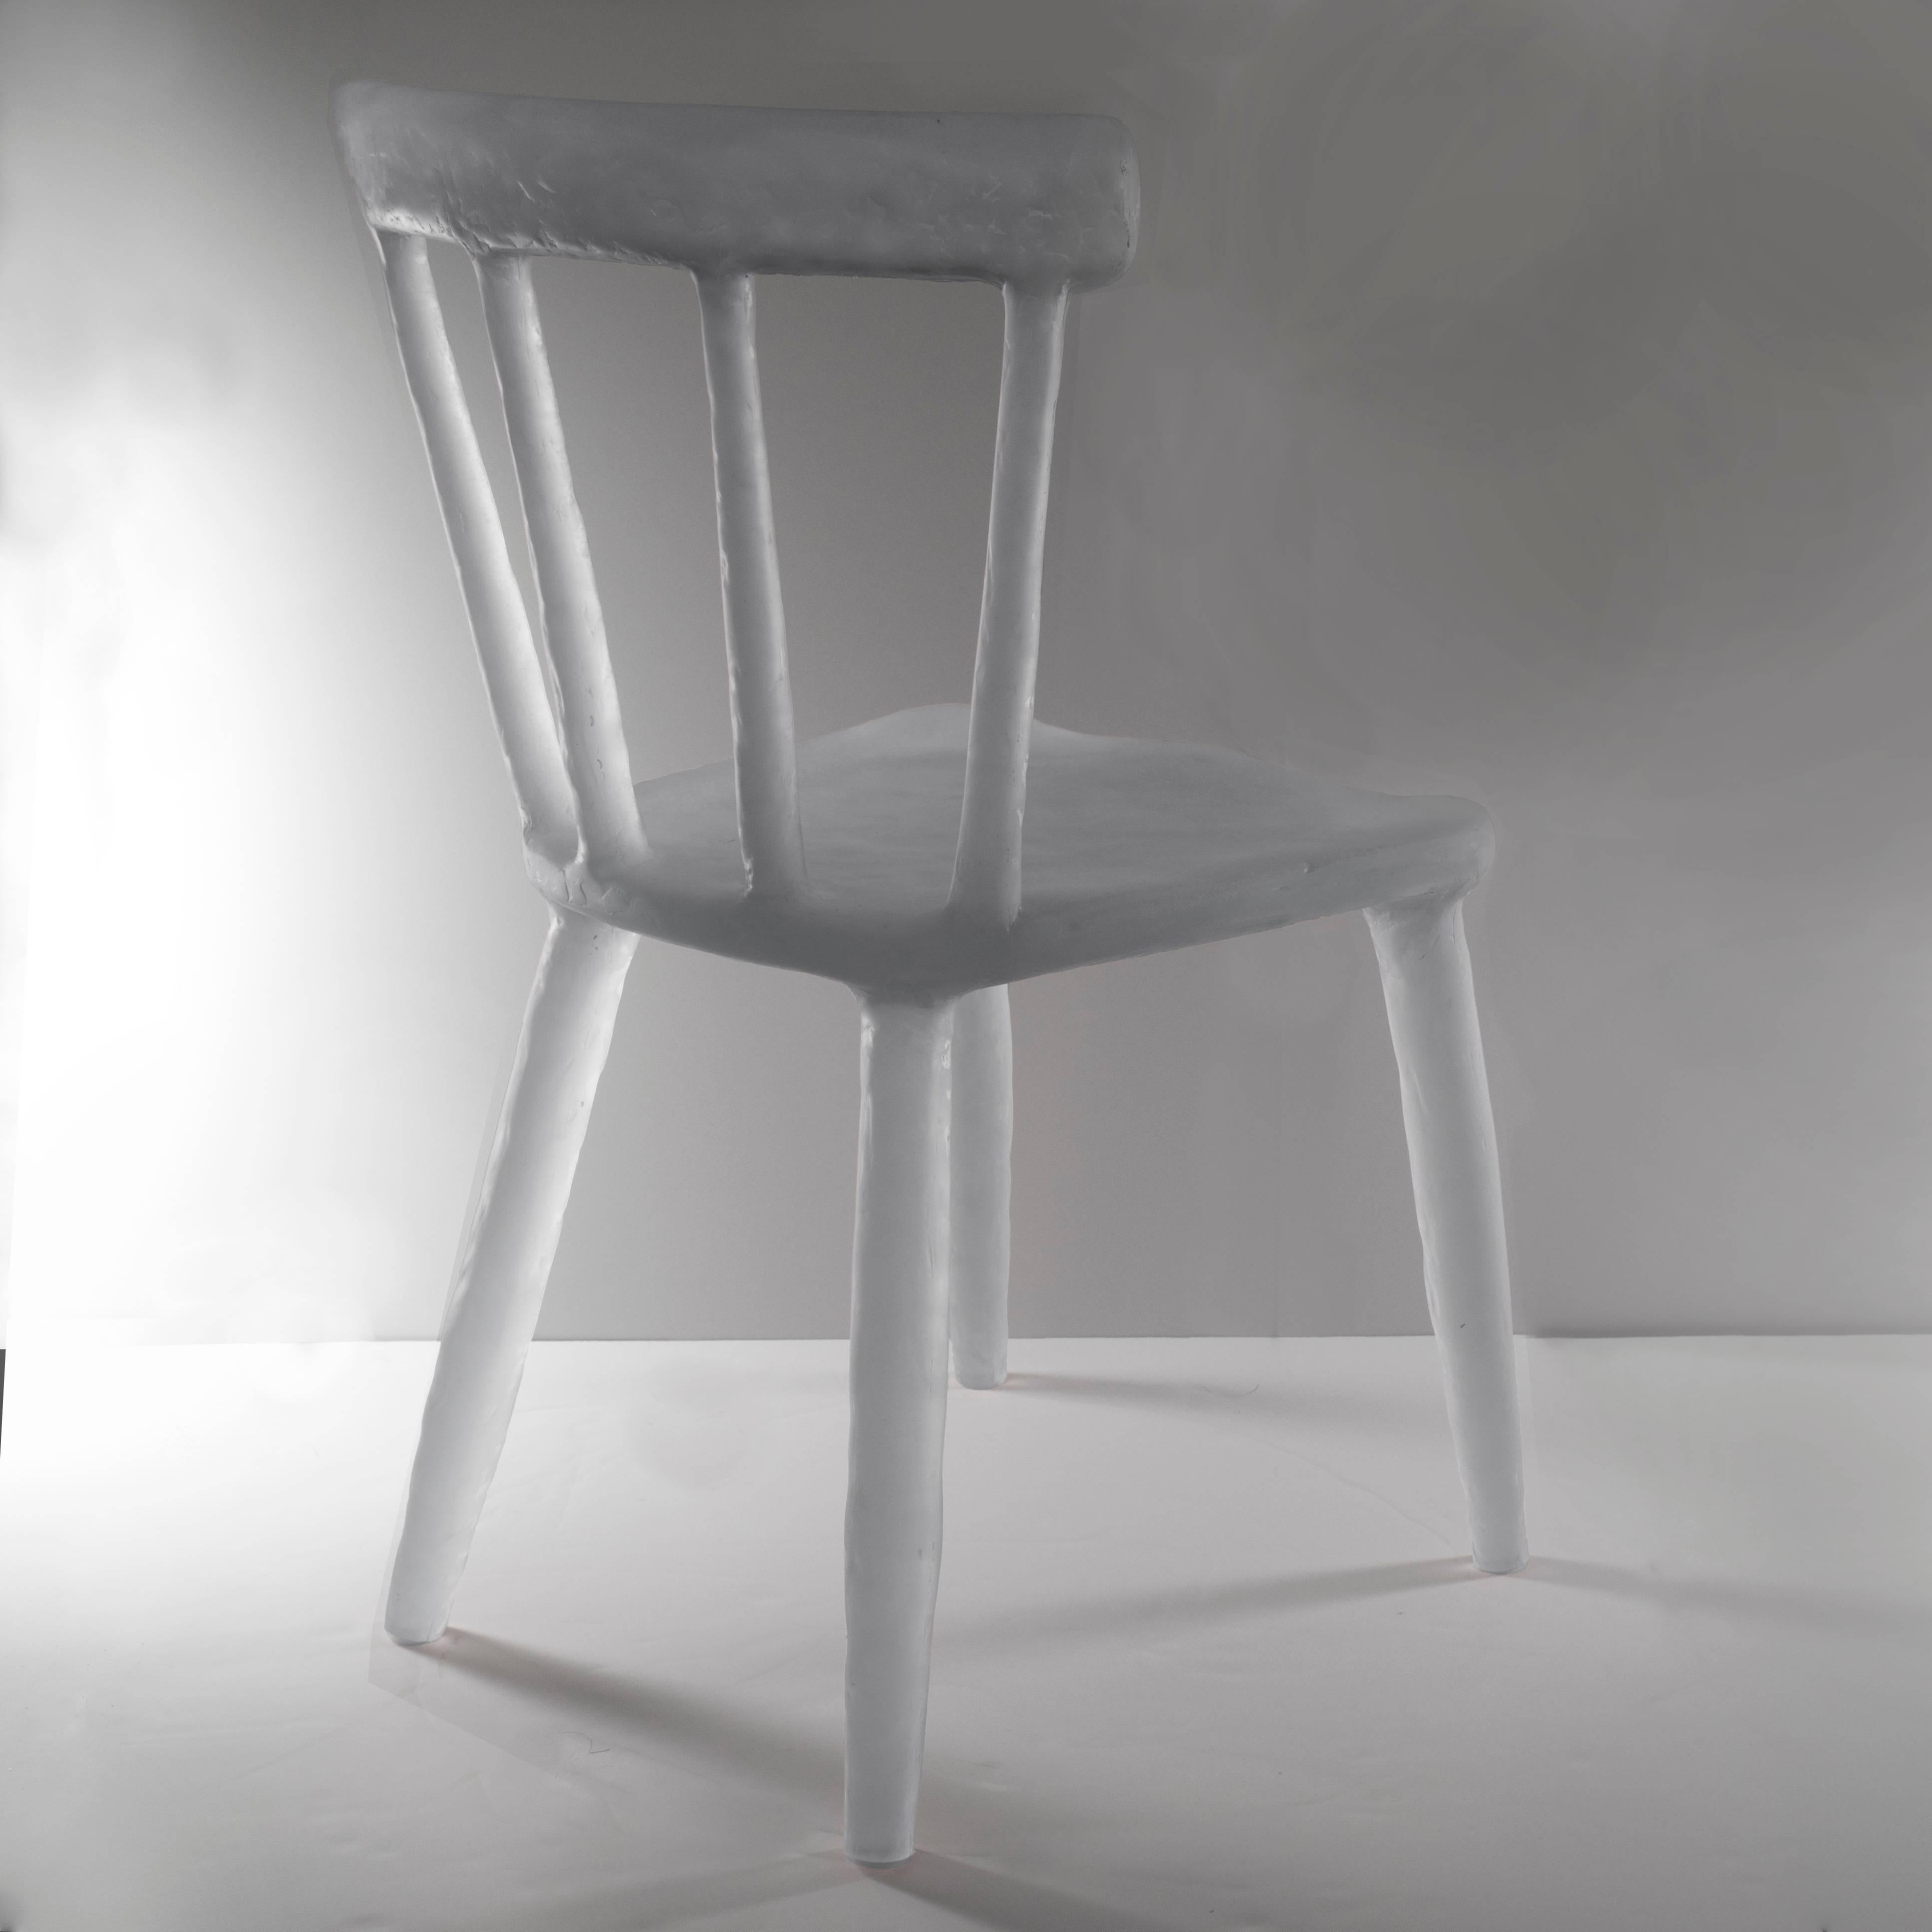 American Glow Chair by Kim Markel in Grey, Handmade from Cast Recycled Resin / Acrylic For Sale